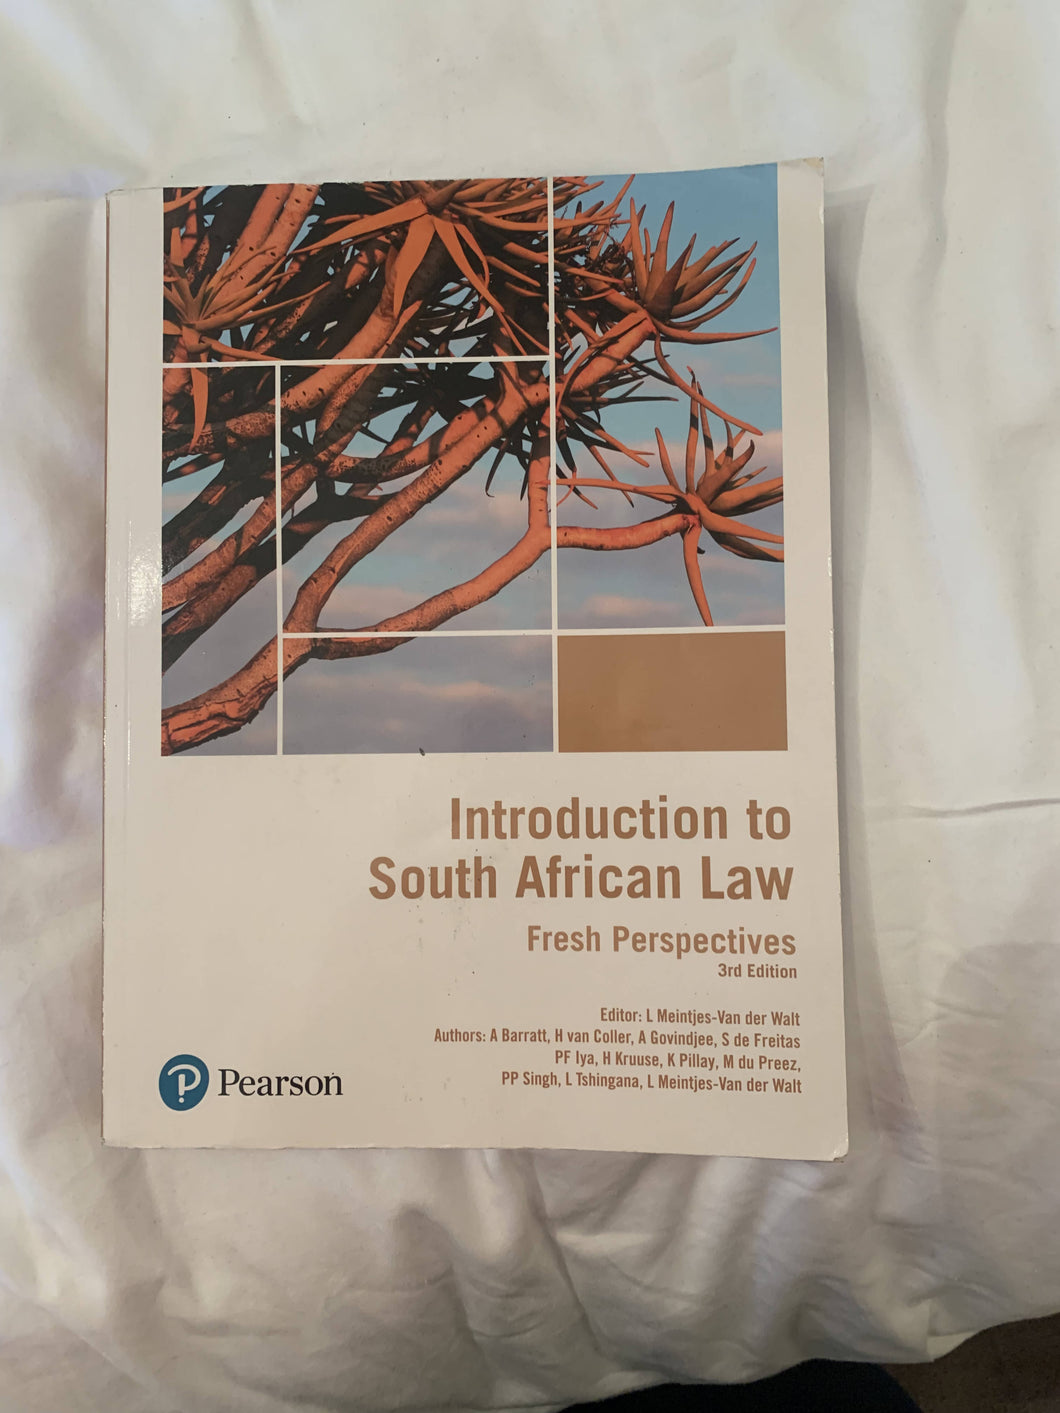 Introduction to South African Law: Fresh Perspectives. 3rd Ed.